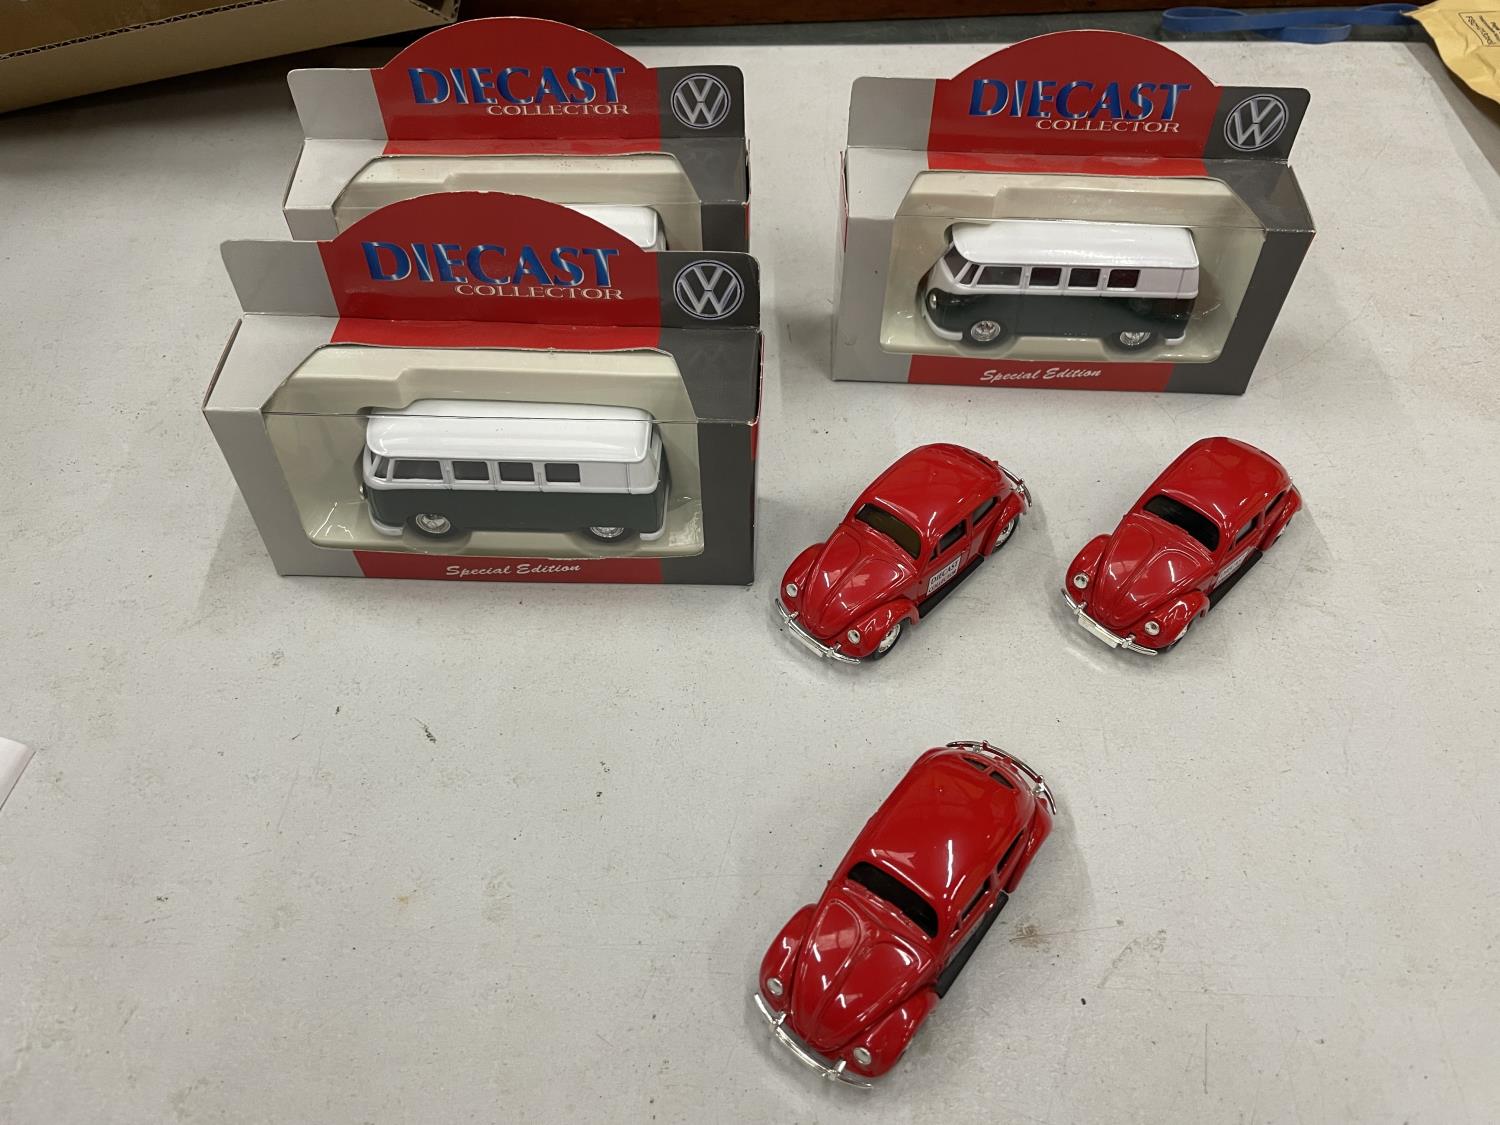 THREE BOXED DIECAST VW COLLECTOR CAMPER VANS WITH A FURTHER 3 UNBOXED VW BEETLES